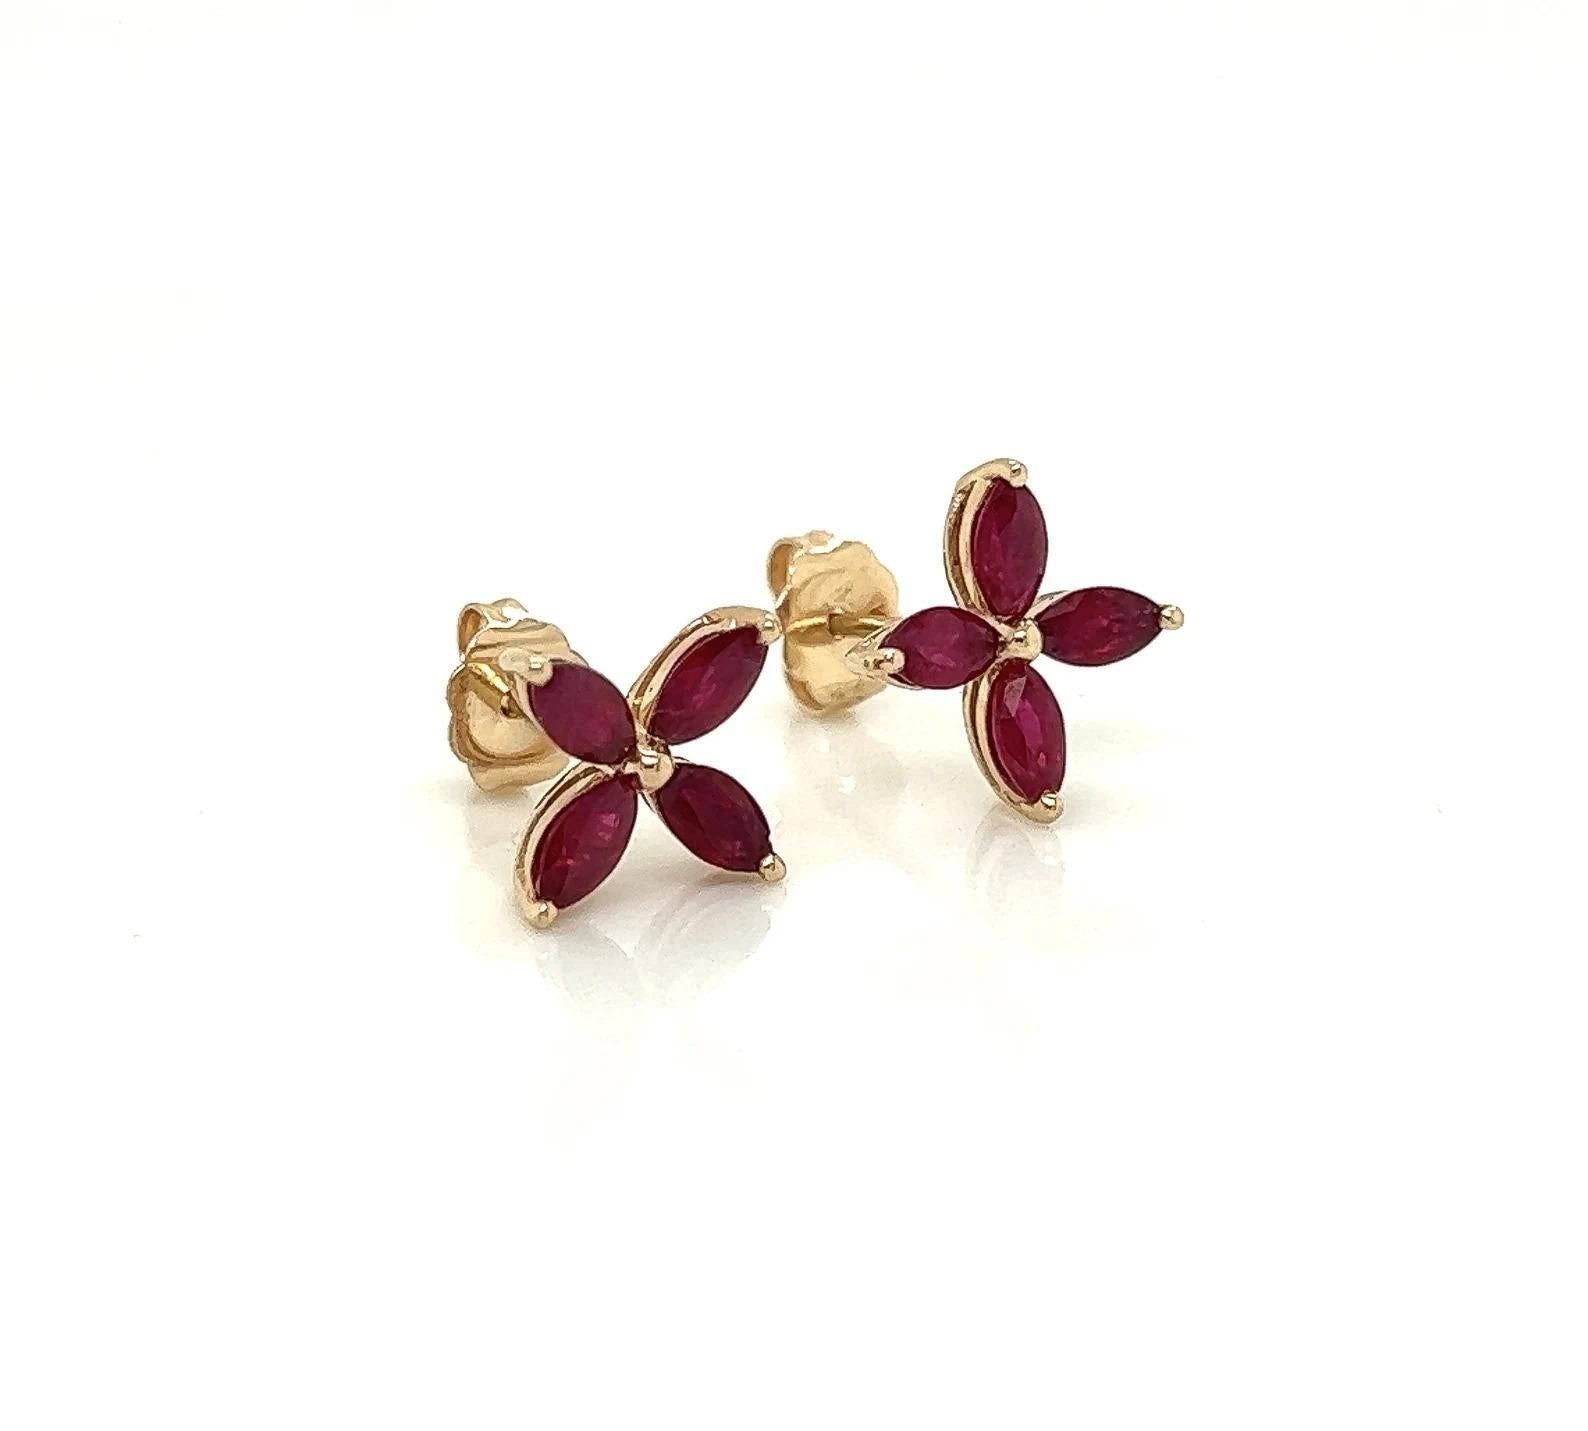 Marquise Cut 2.05 Total Carat Ruby Flower Motif Pushback Earrings in 14K Yellow Gold For Sale